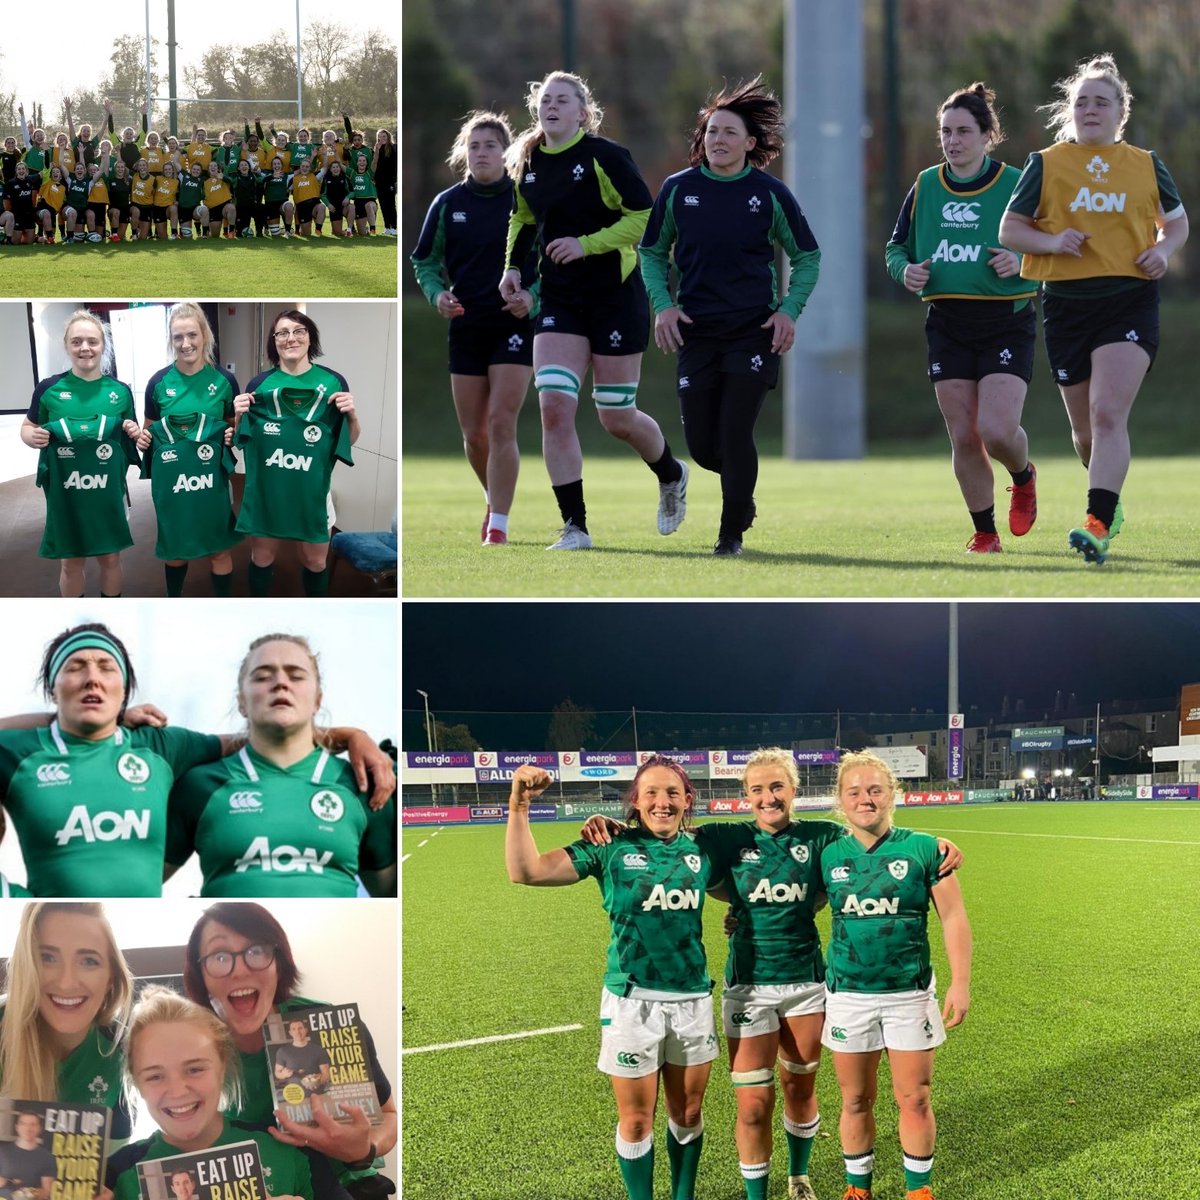 'Leaders aren't born they are made'- Vince Lombardi. U are my leader & my inspiration from day 1 @cmoloney3 NEVER CHANGE💚🇮🇪☘!! I am so proud of u & will always stand #shouldertoshoulder with u #NotAlone 'Be more concerned with your character than your reputation' John Wooden